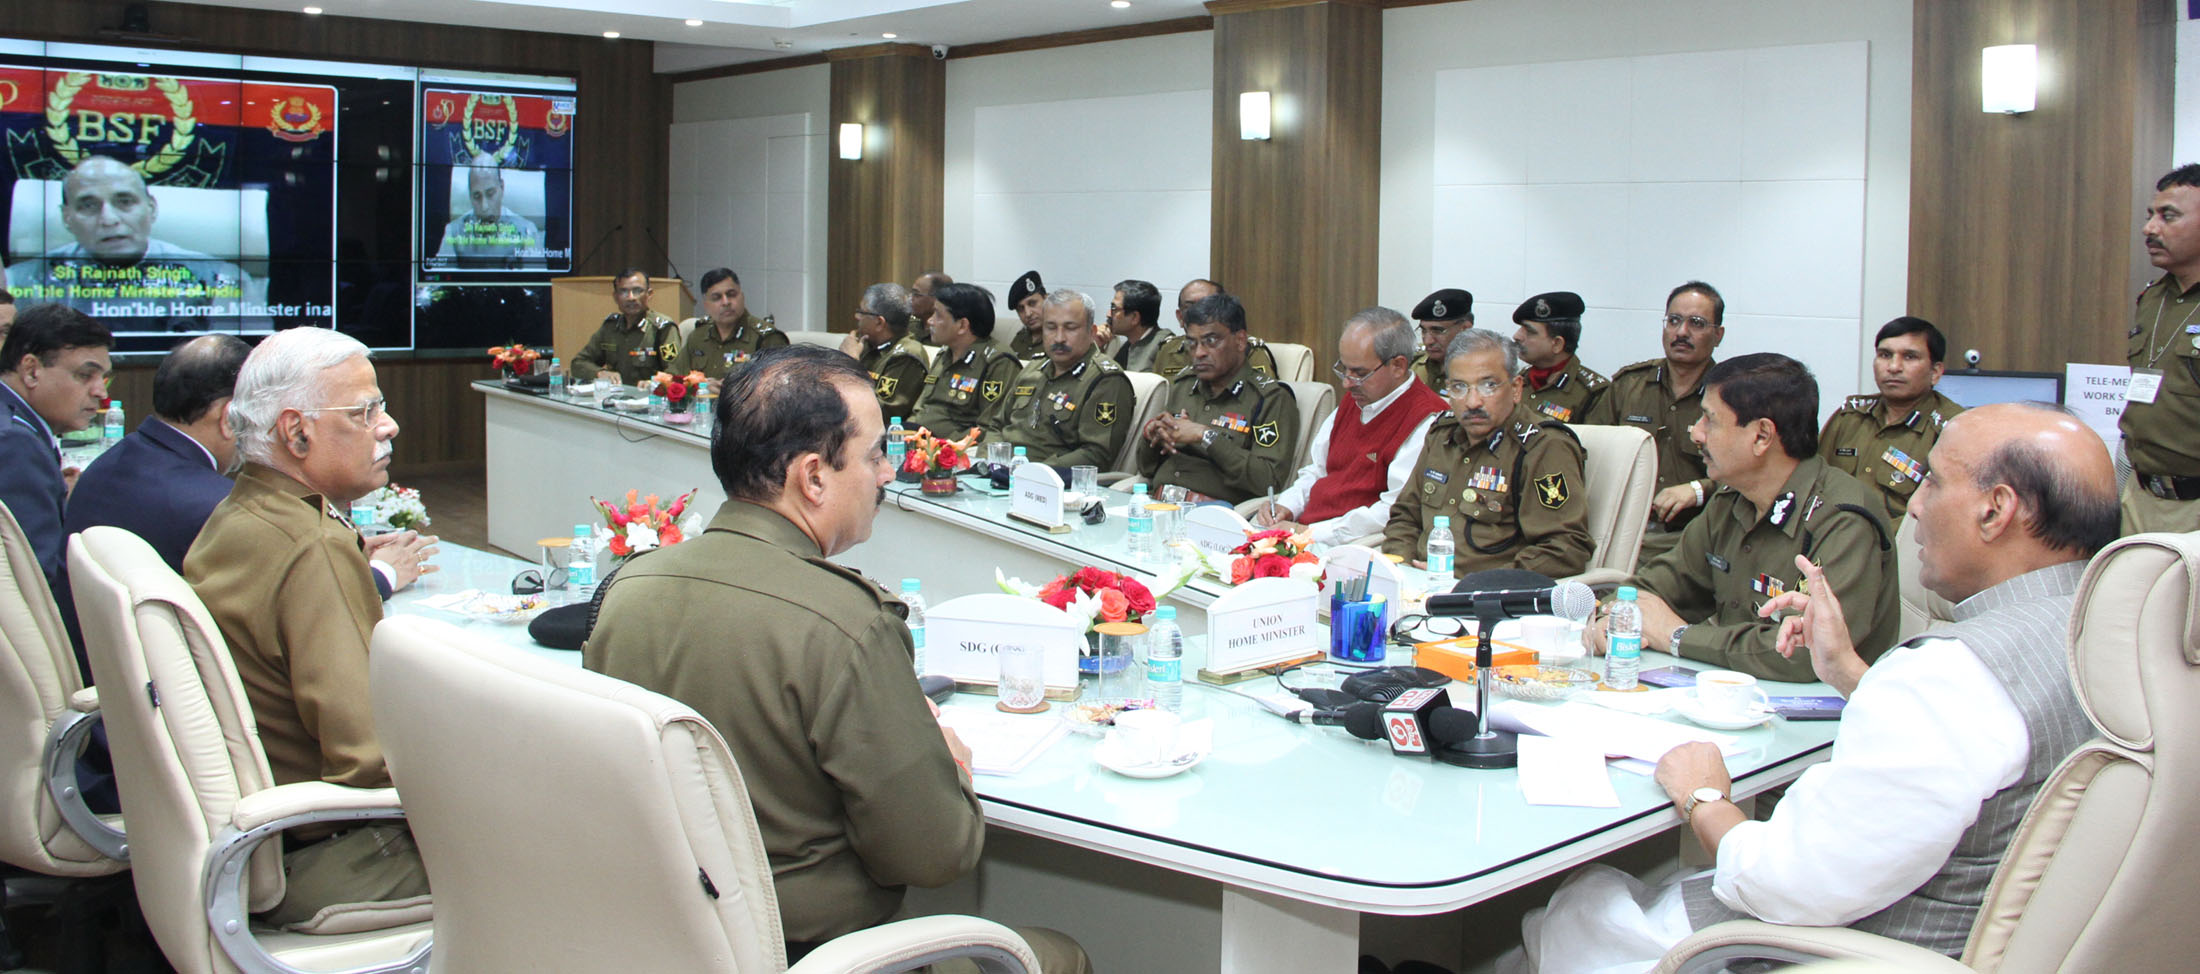 The Union Home Minister, Shri Rajnath Singh inaugurating some welfare visions, first of its kind in CAPFs, at BSF Headquarters, in New Delhi on February 26, 2016.